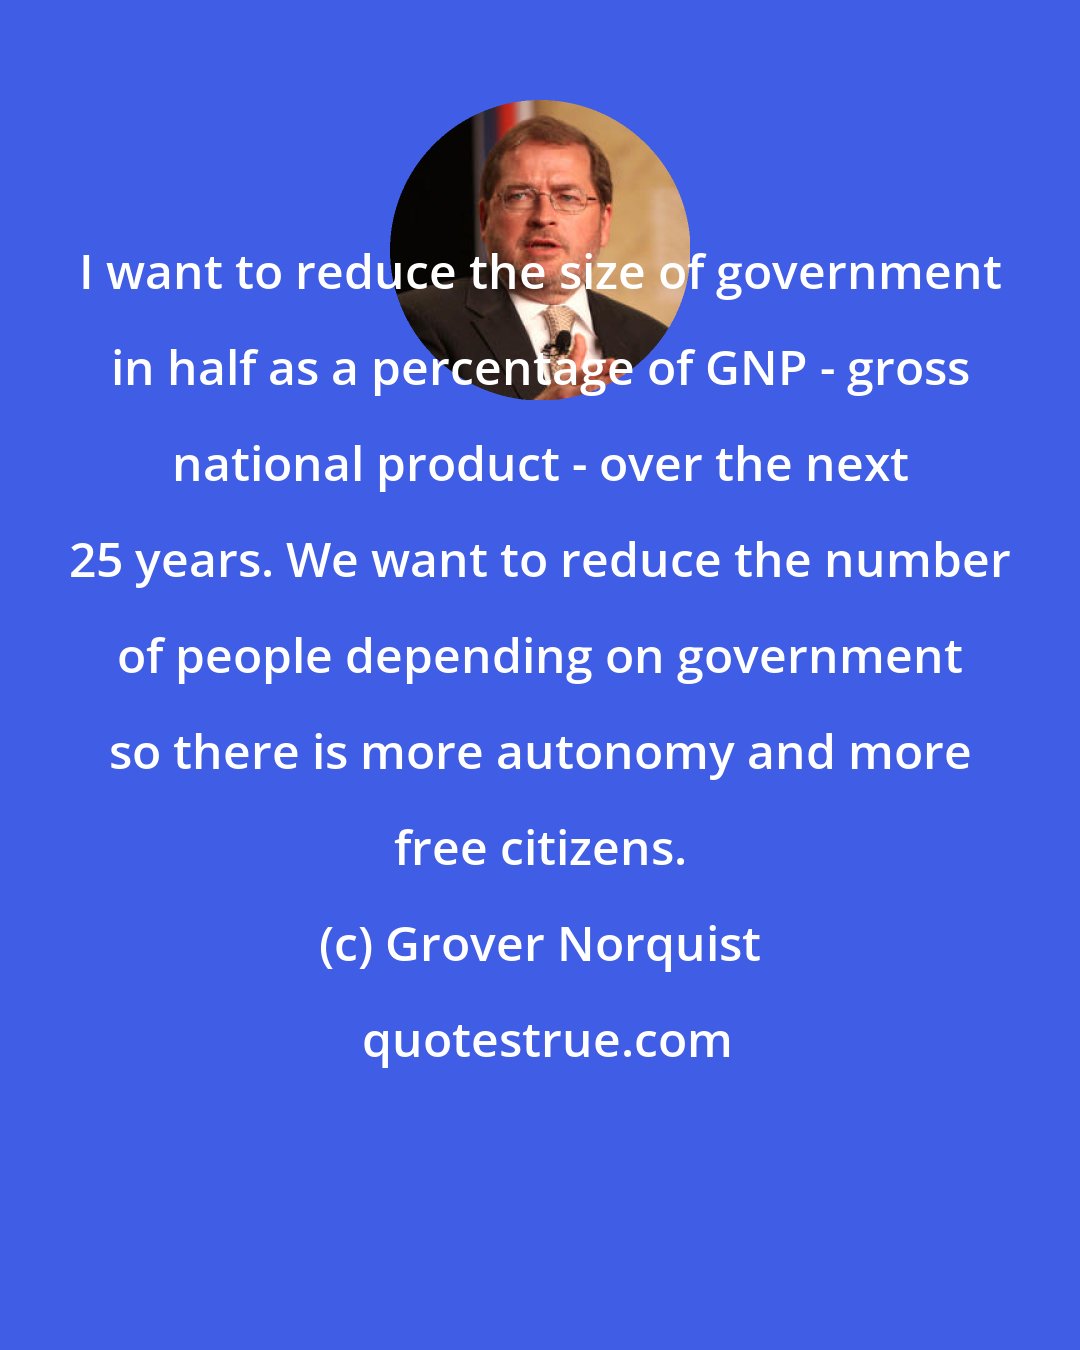 Grover Norquist: I want to reduce the size of government in half as a percentage of GNP - gross national product - over the next 25 years. We want to reduce the number of people depending on government so there is more autonomy and more free citizens.